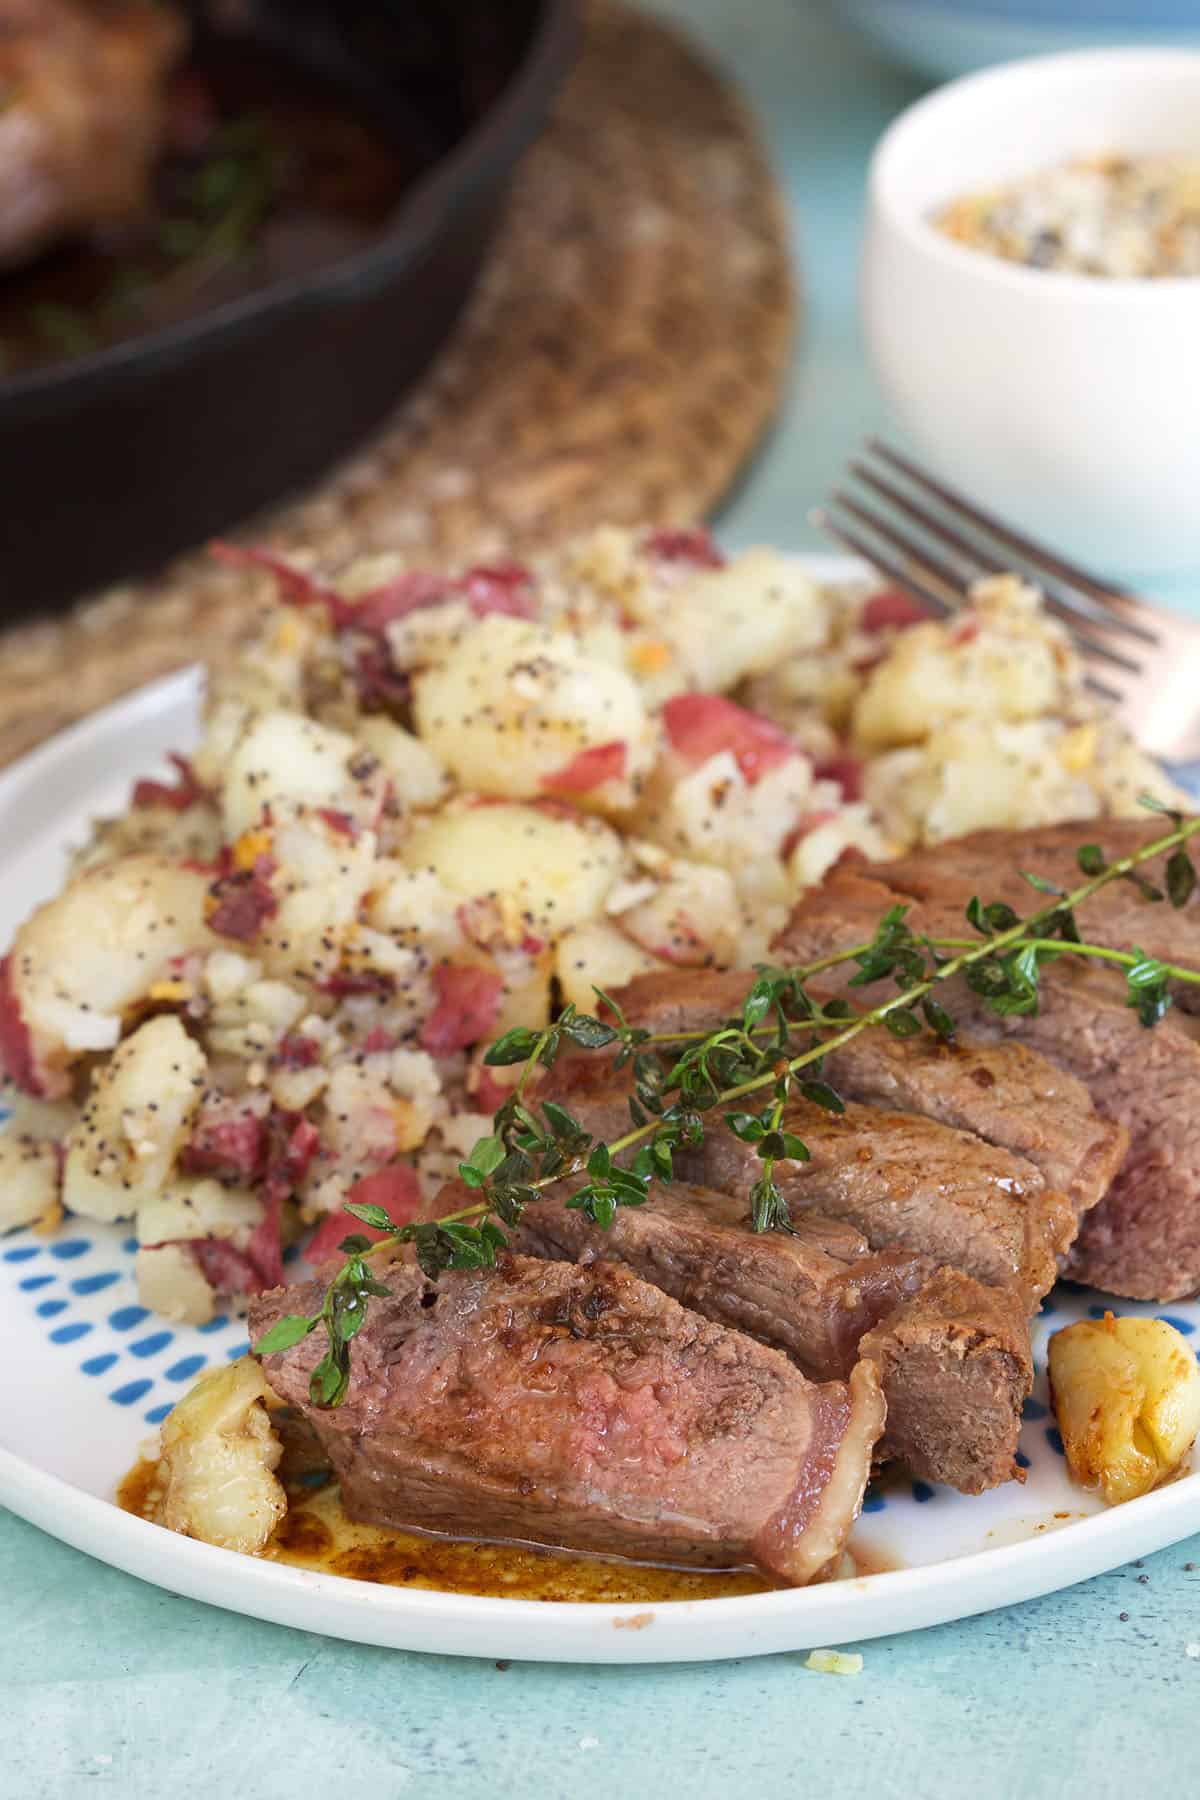 Steak and potatoes are served with fresh thyme on a blue and white plate.